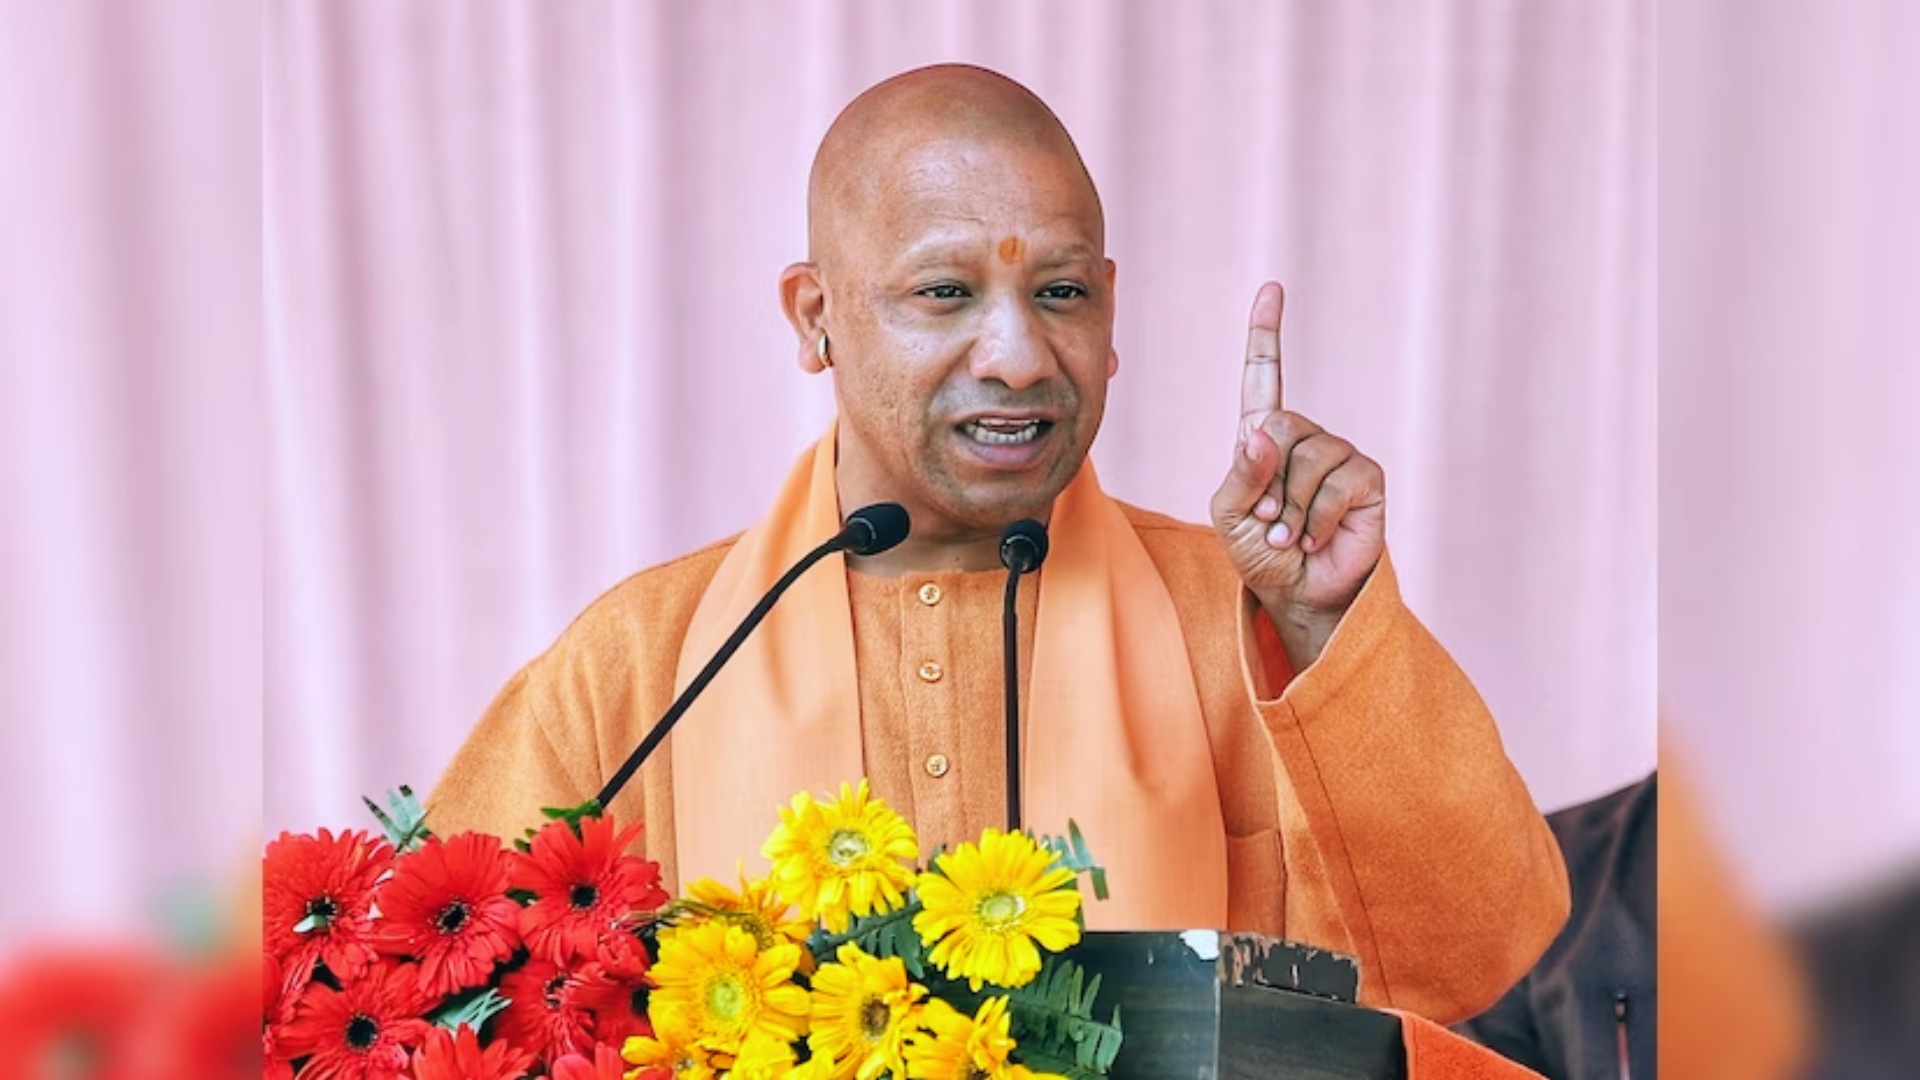 Yogi Adityanath Urges Ministers to Ditch VIP Culture, Connect with Citizens, Post Disappointing LS Results